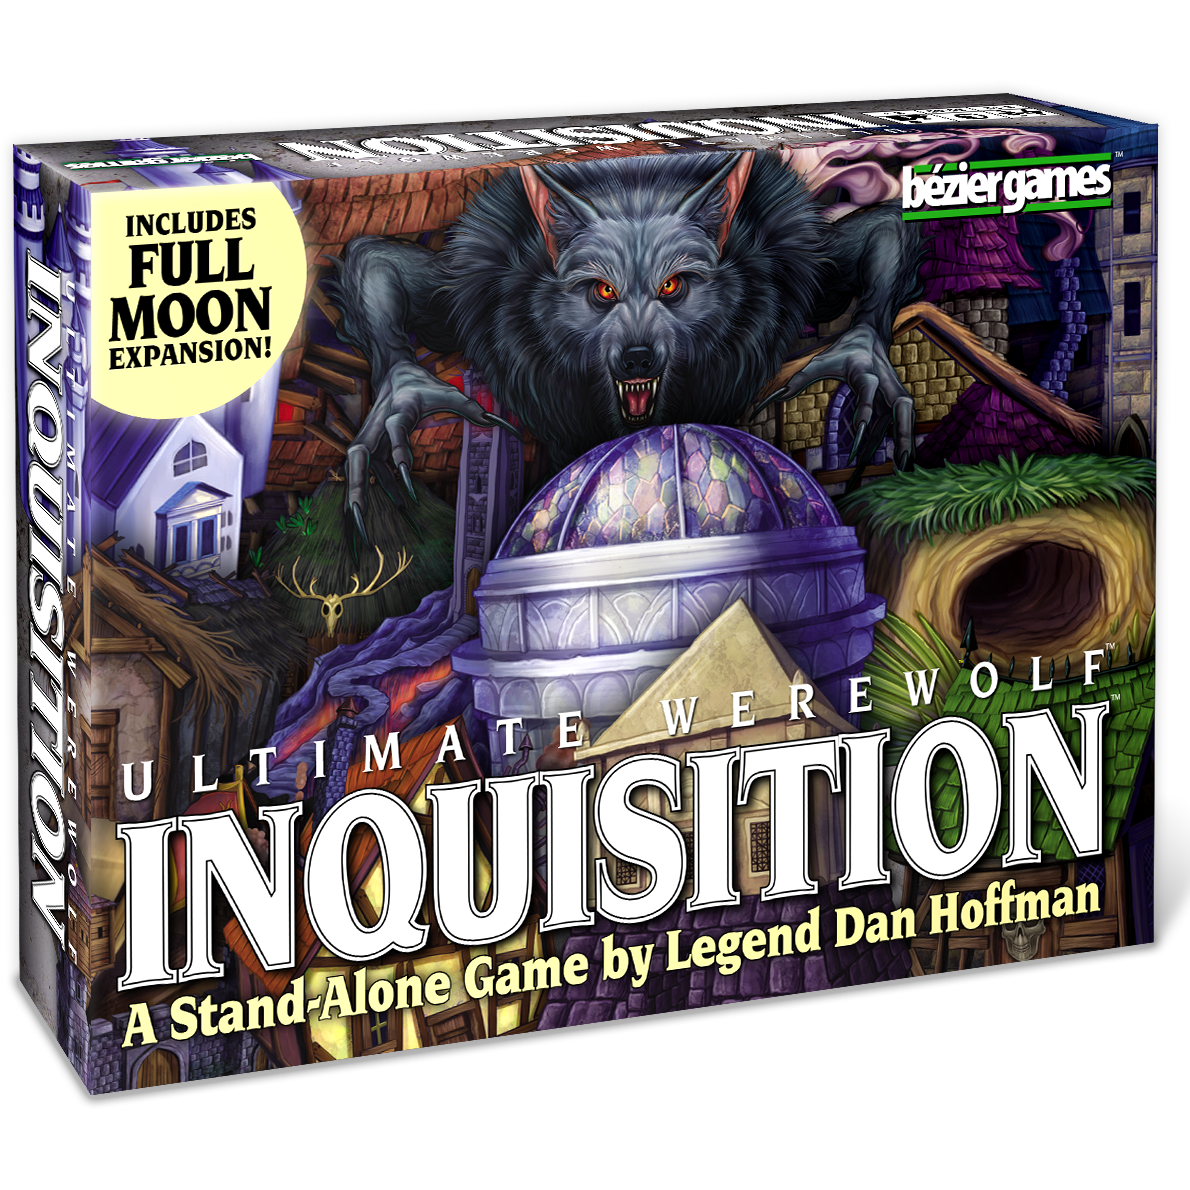 (BSG Certified USED) Ultimate Werewolf - Inquisition